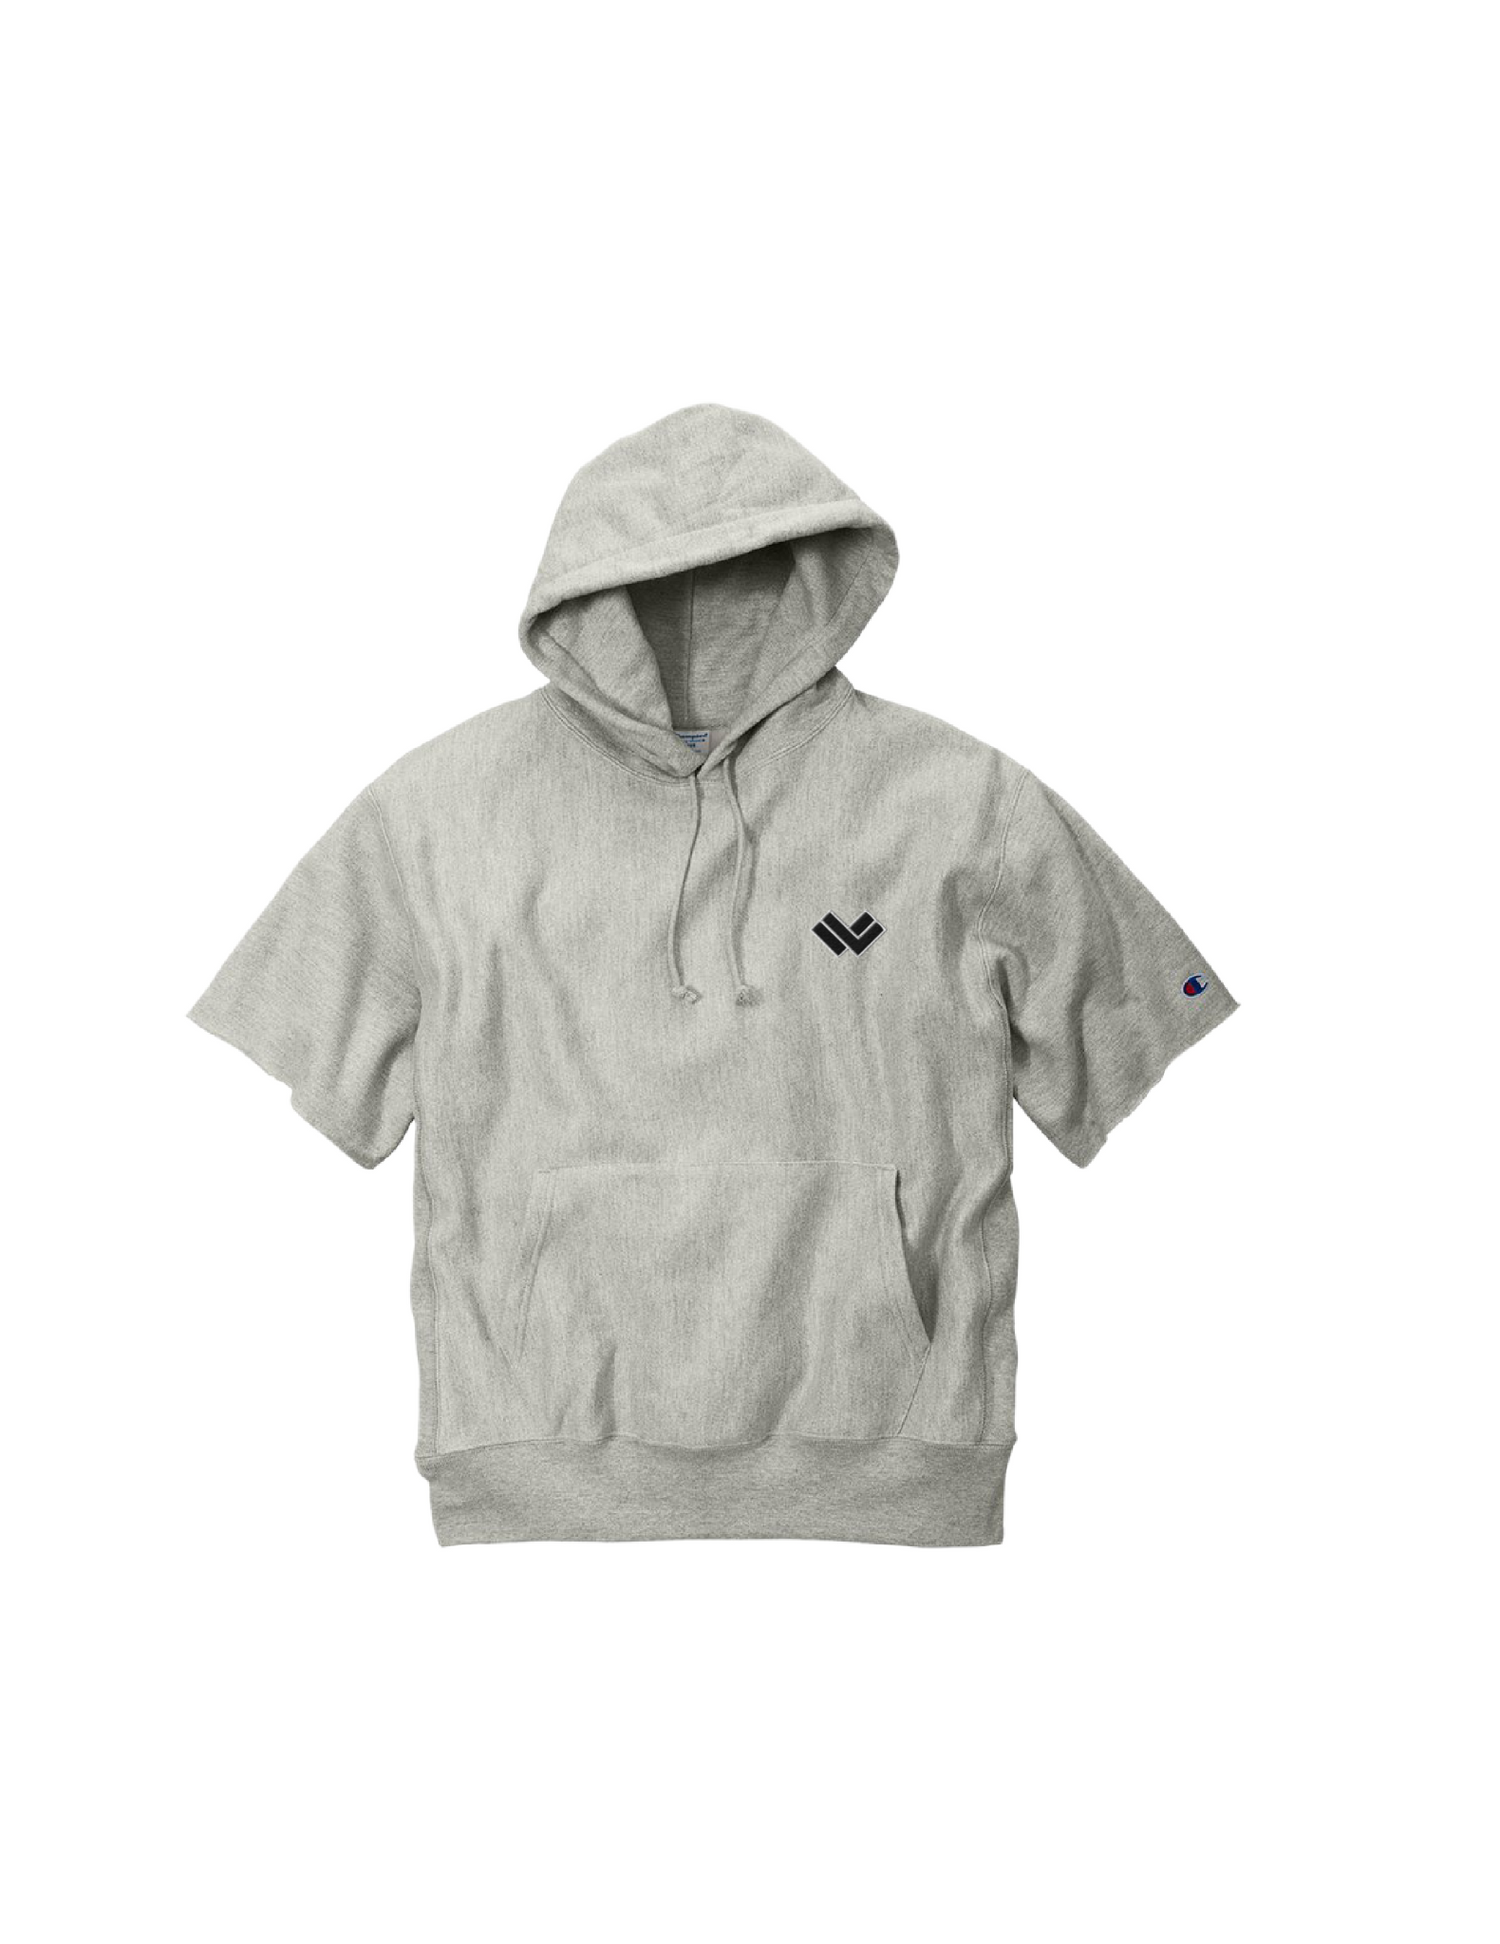 Champion's Belichick - The Cradle Collection B/W Lacrosse Hoodie - White Front 